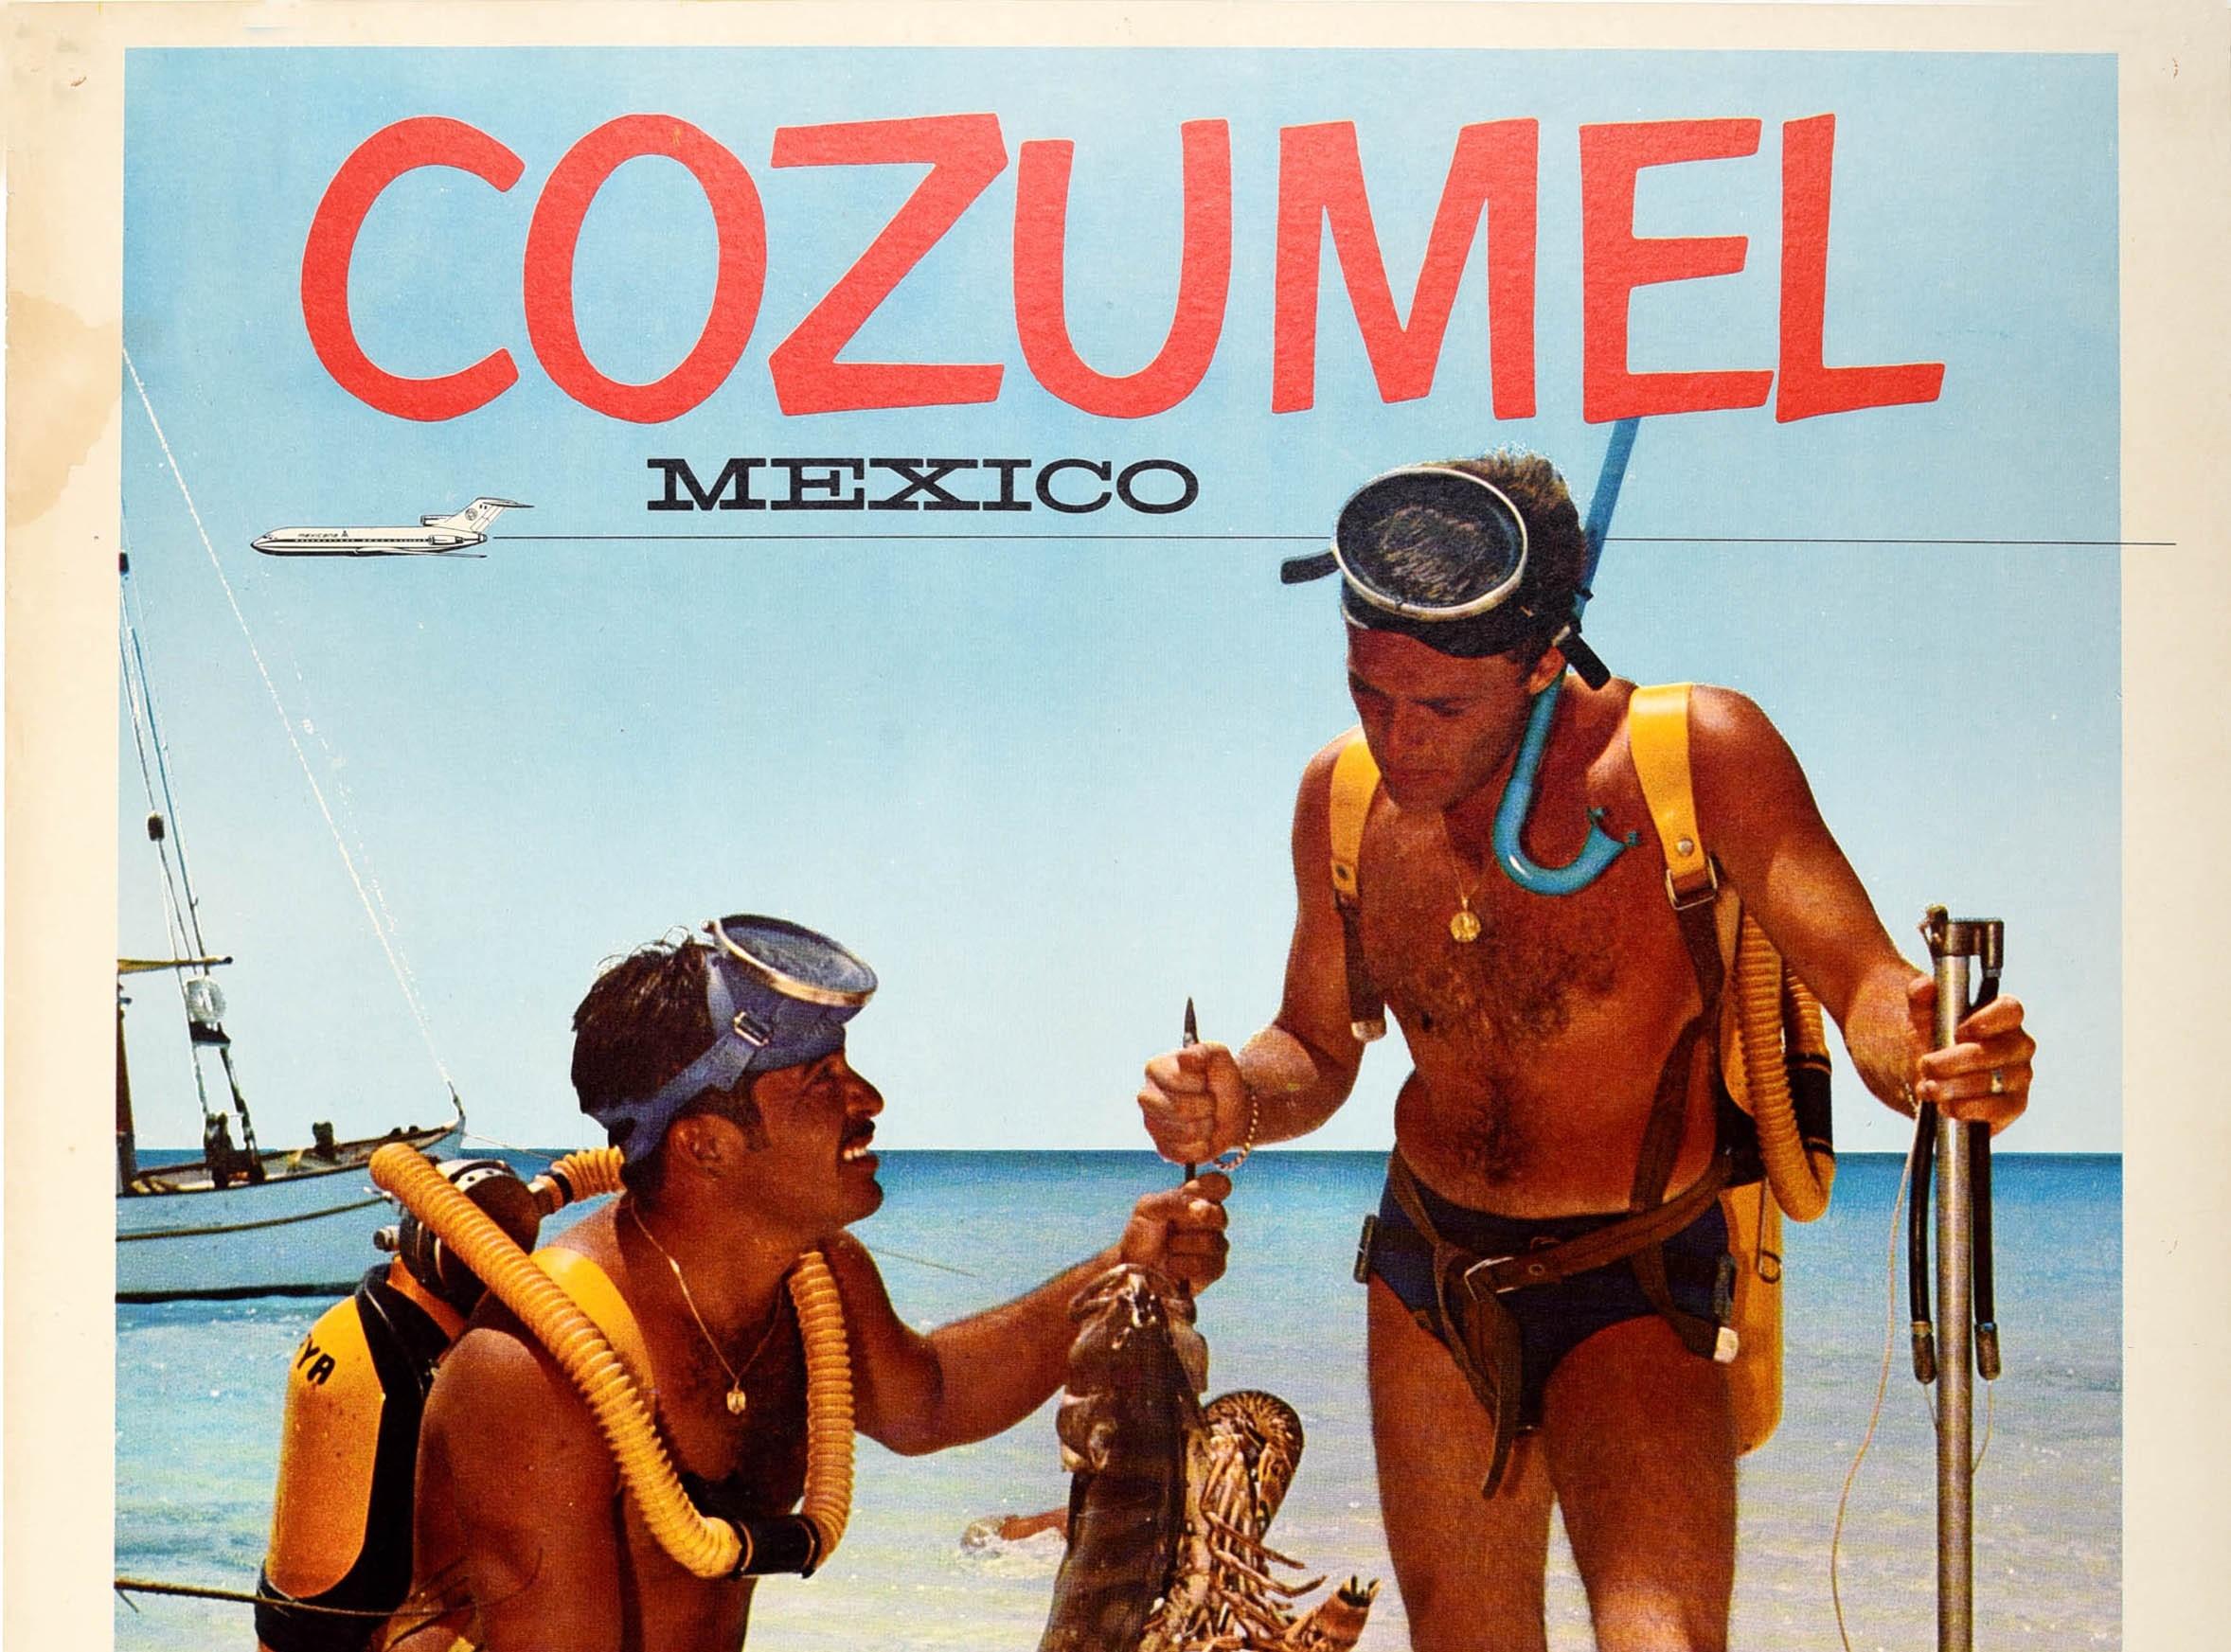 Original vintage travel poster for Cozumel Mexico issued by Mexicana airlines featuring a photo of a two scuba divers on a sandy beach with a sailing boat in the background and a stylised plane flying over the sea against the blue sky below the bold